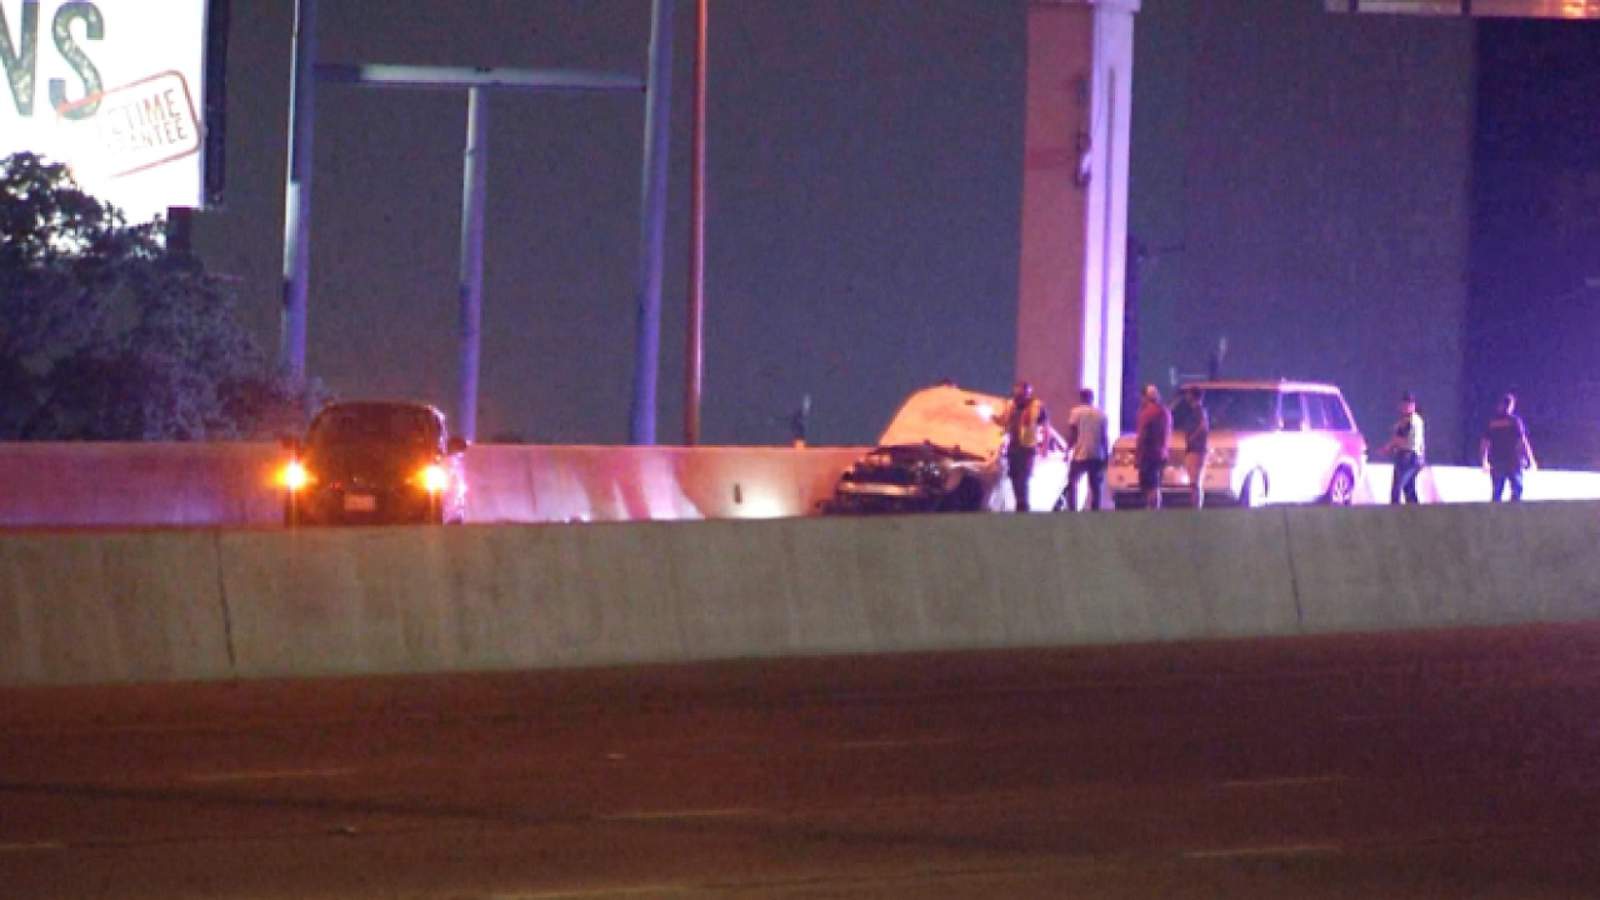 Driver killed in rollover crash on Loop 410 identified